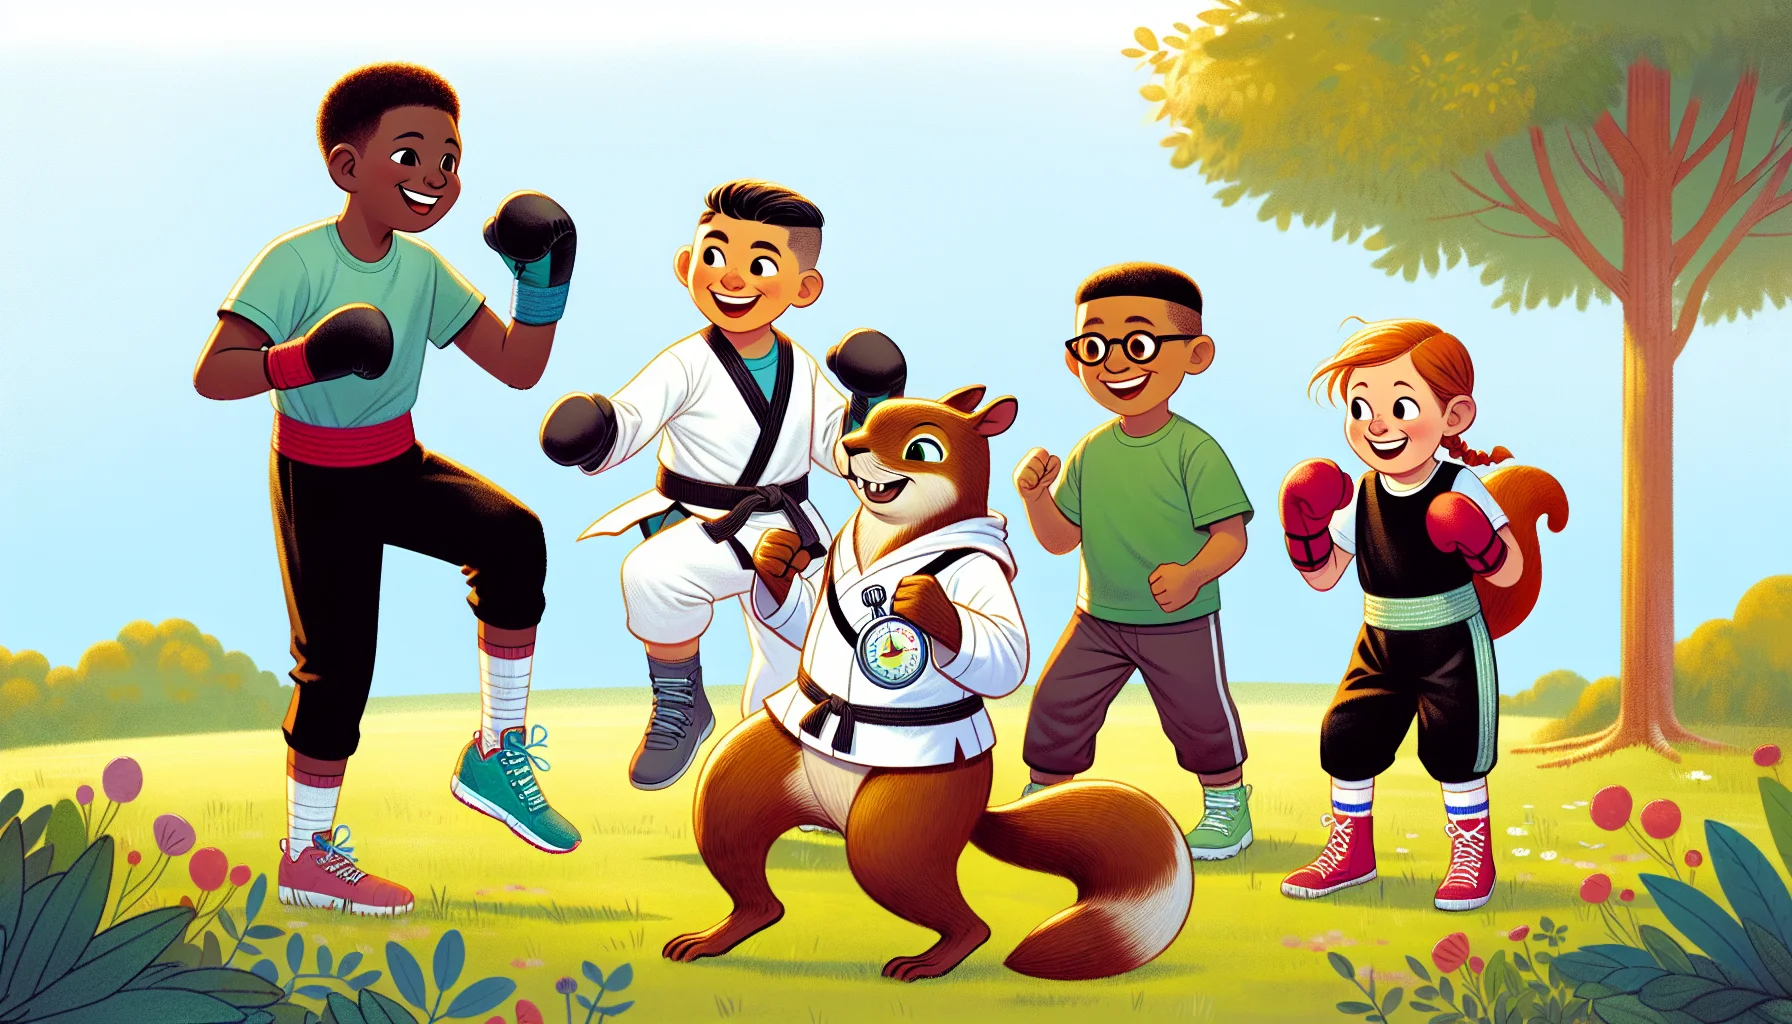 Illustrate a highly detailed and engaging scene showing a group of four kids of varying descents - a black girl, a Hispanic boy, a Caucasian girl, and a Middle-Eastern boy, all in kickboxing attire, having a blast doing kickboxing on a sunny day in a park. They're not just kickboxing, but also indulging in friendly and playful banter. An anthropomorphic squirrel in workout attire, acting as their cheerful coach, with a stopwatch in one paw, encouraging them to keep moving with a lively sense of humor. The image should be bright, entertaining, and inspire viewers to stay active and fit.